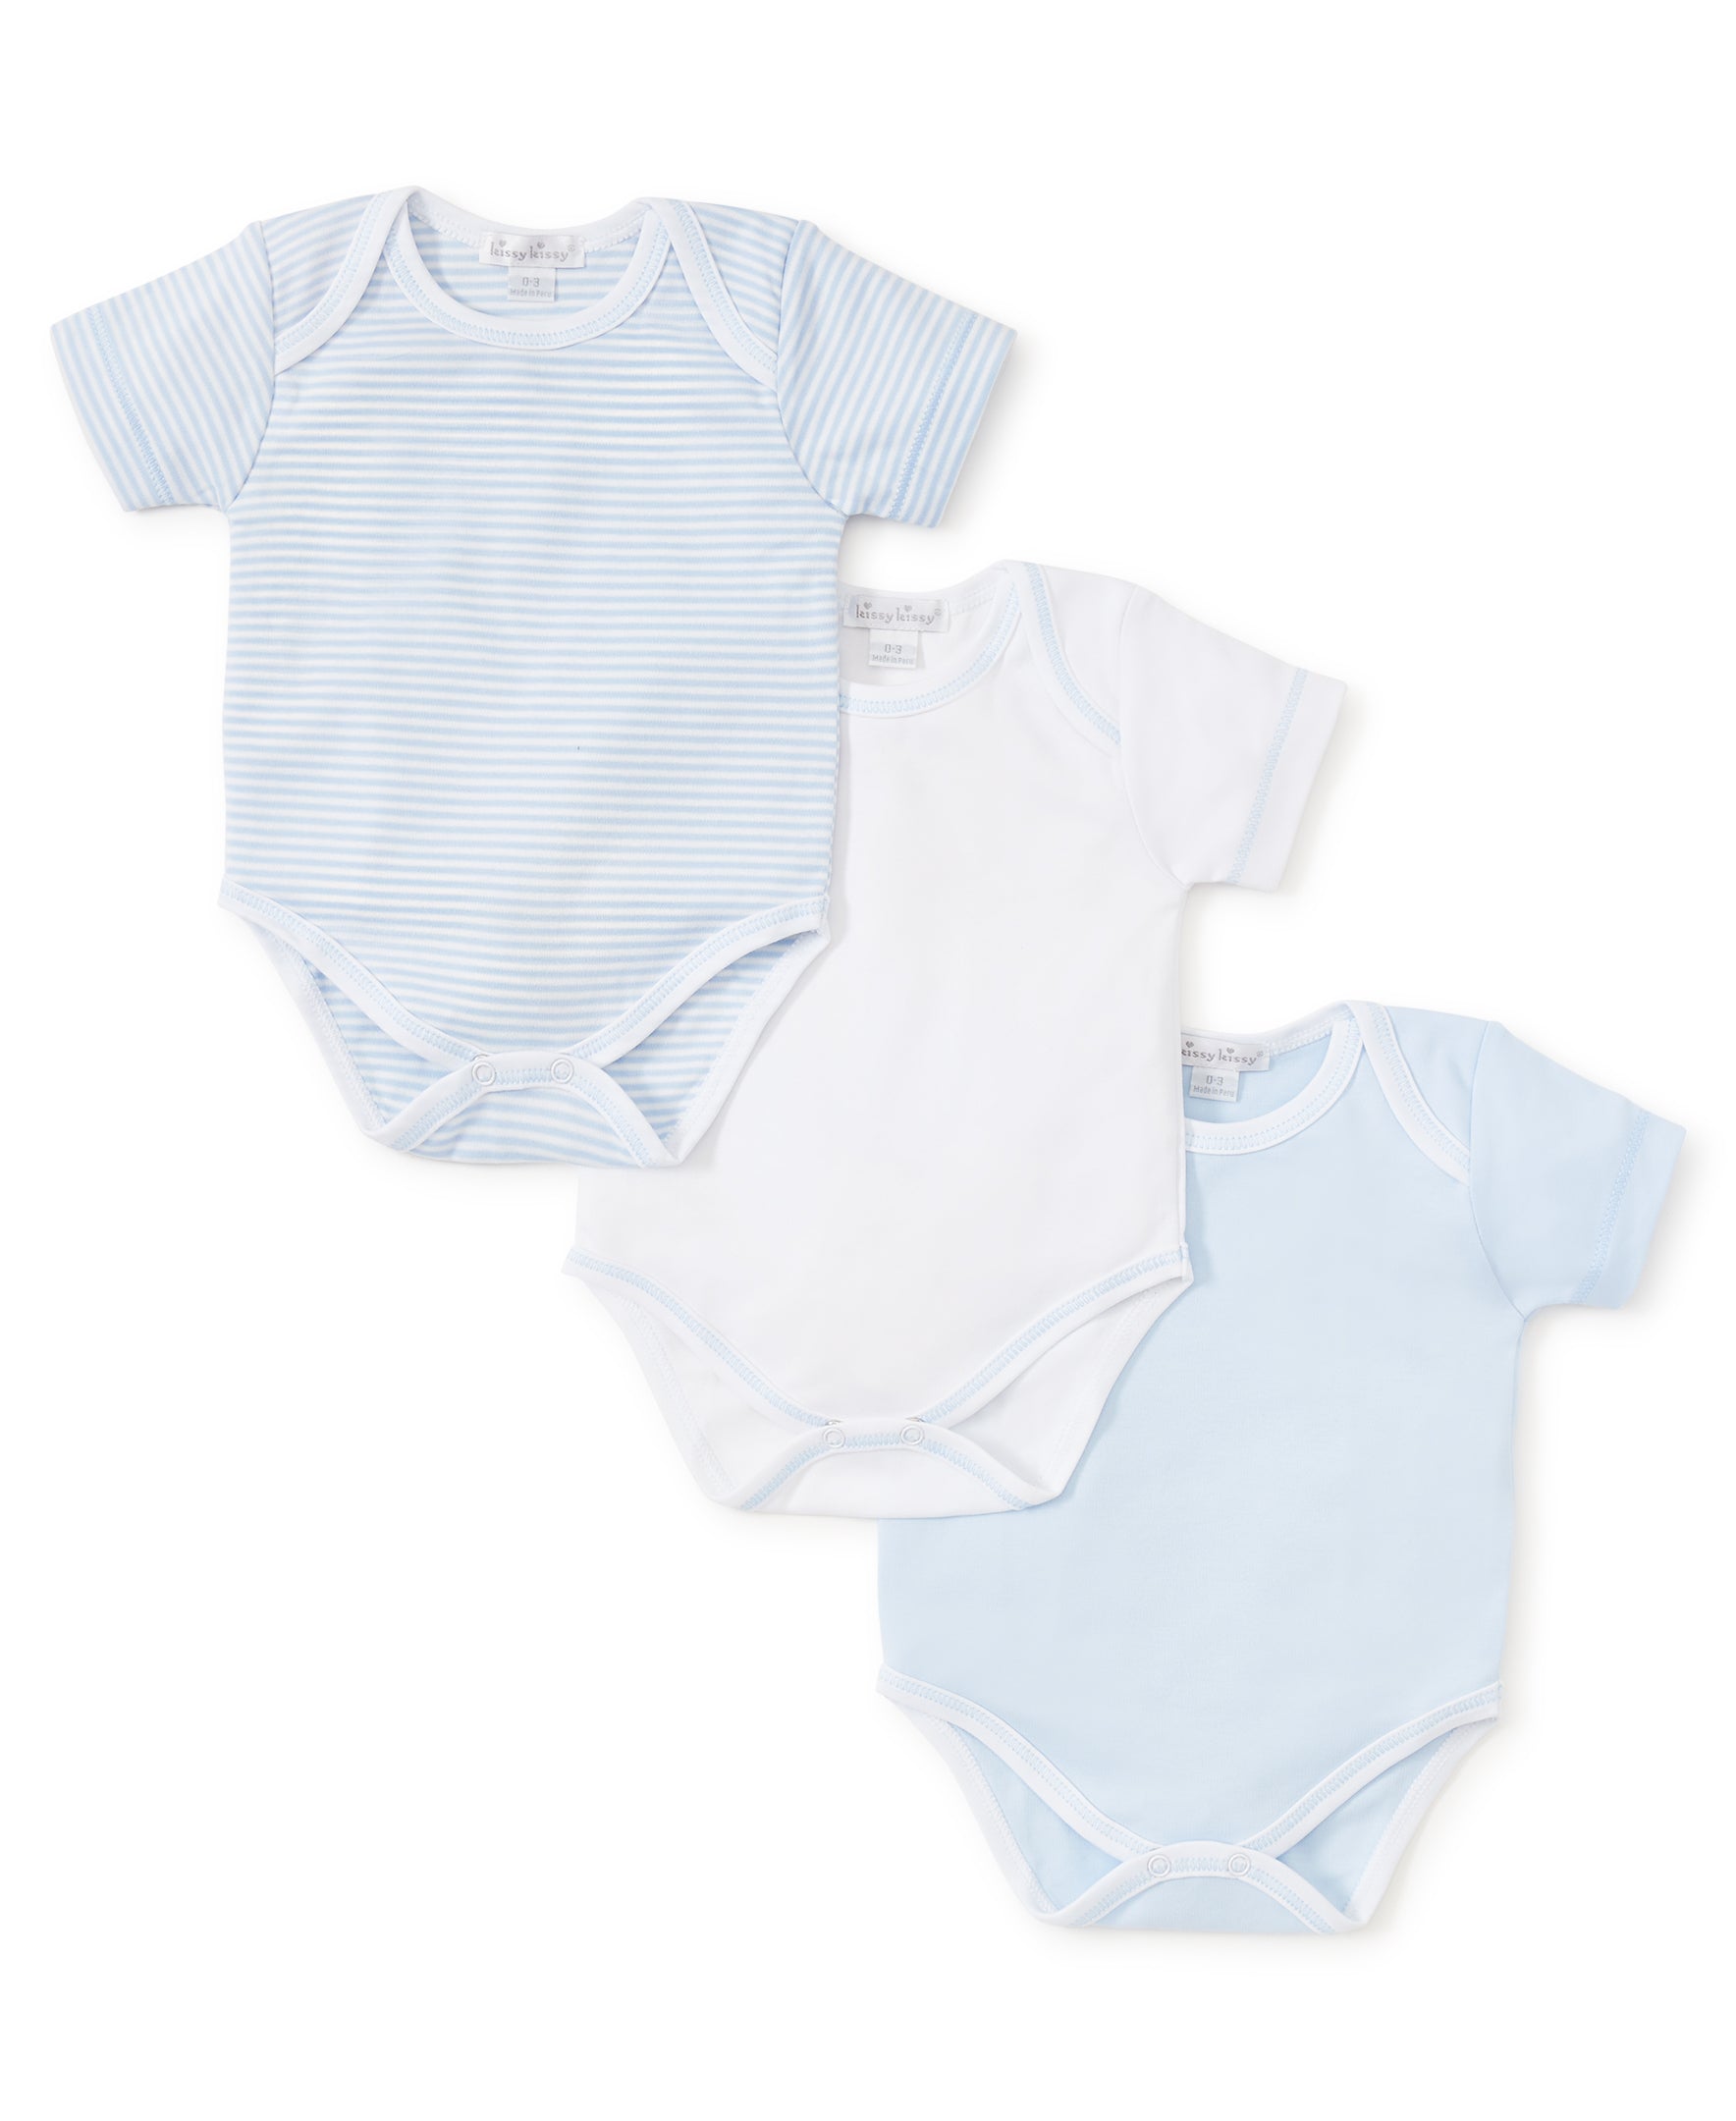 Set of 3 Short Sleeve Blue Stripe Body Suits in a Gift Bag